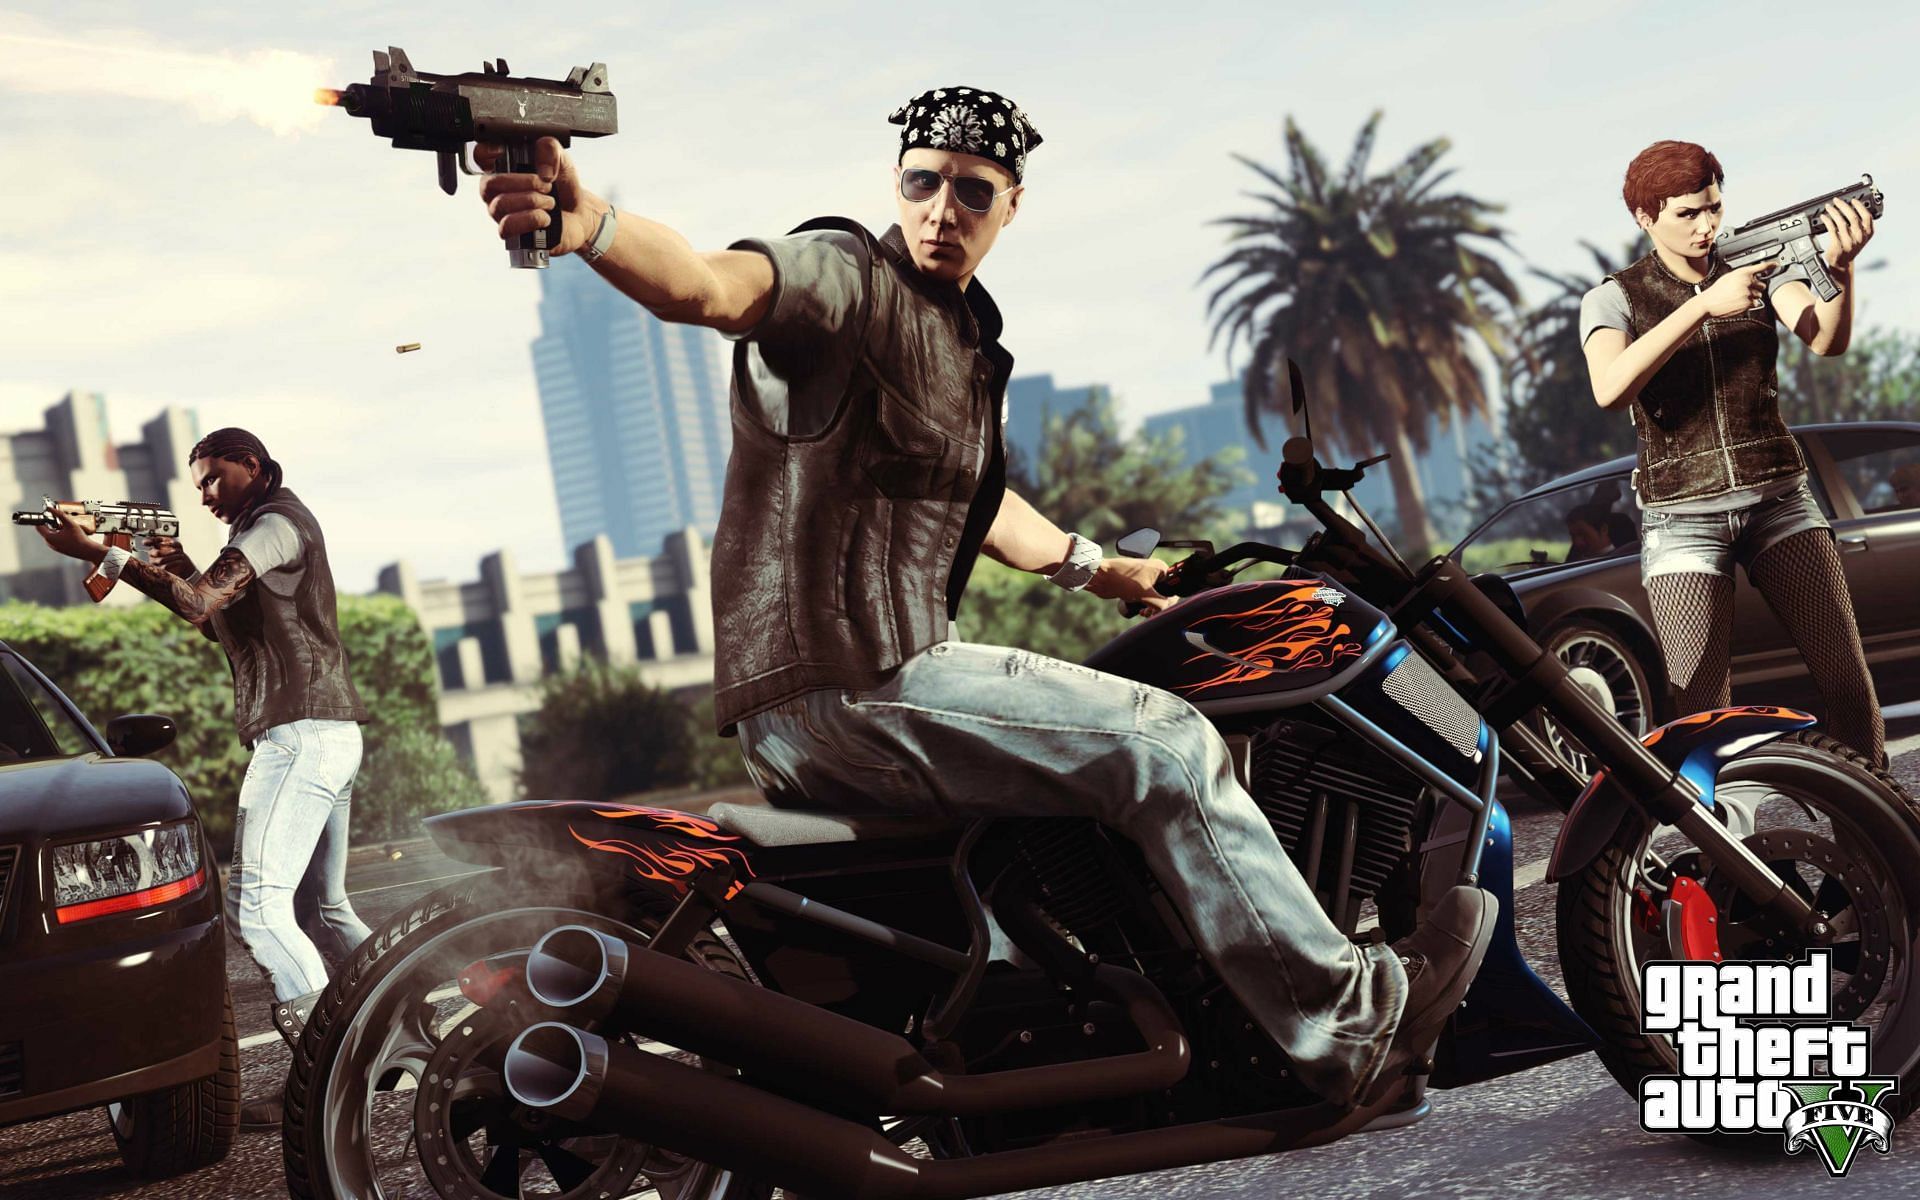 Pre-ordering will become available a week before the official release (Image via Rockstar Games)